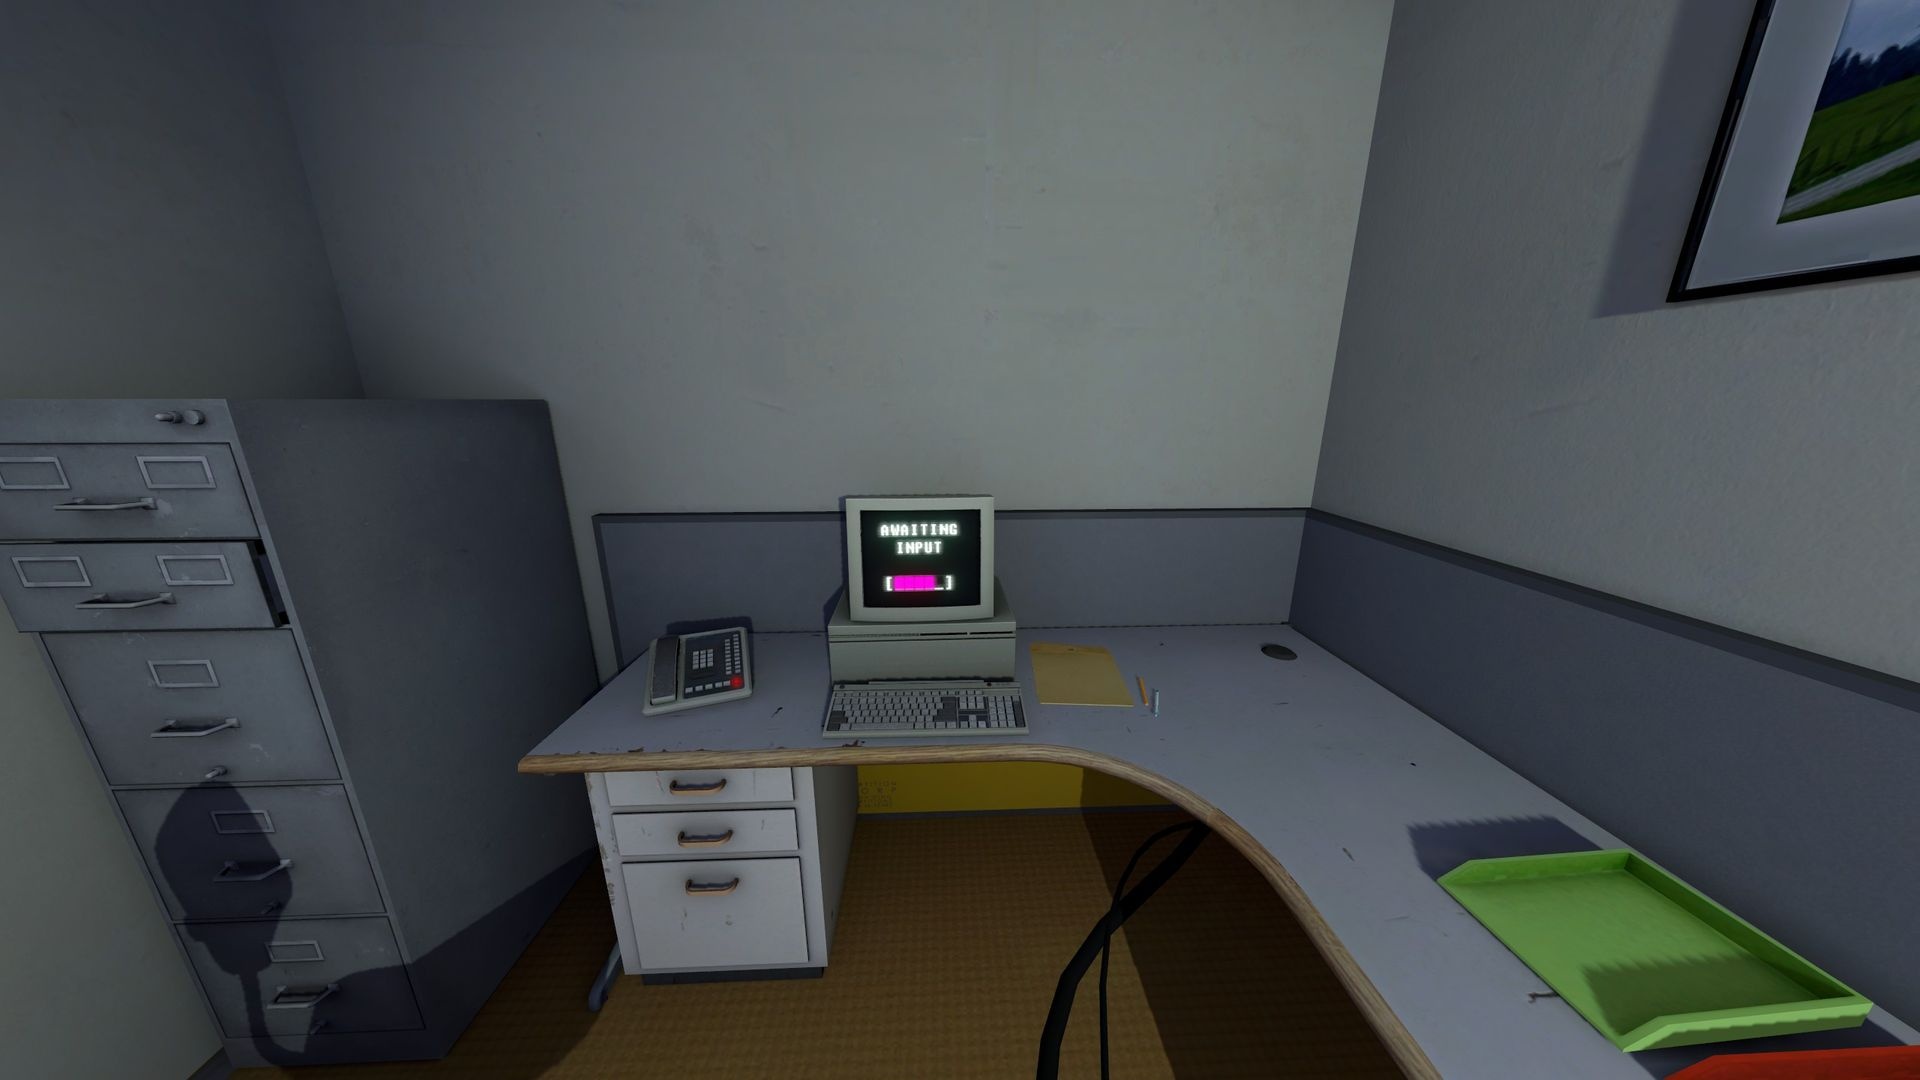 The Stanley Parable Ultra Deluxe: The Countdown Ending, Press "On" in the Mind Control Facility's power source. 1920x1080 Full HD Background.